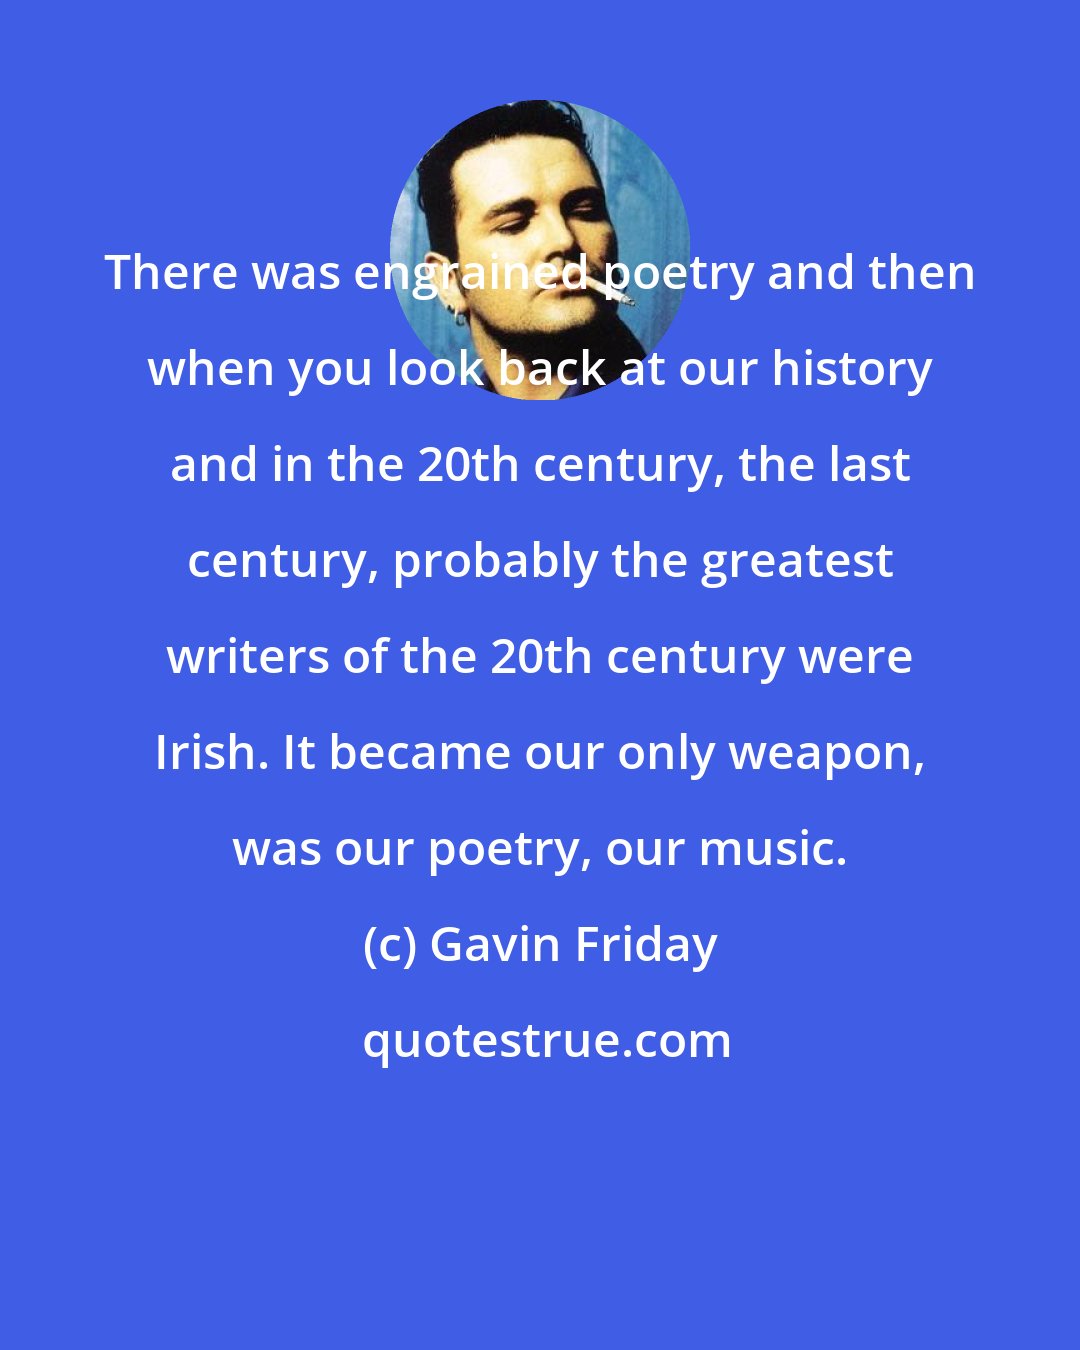 Gavin Friday: There was engrained poetry and then when you look back at our history and in the 20th century, the last century, probably the greatest writers of the 20th century were Irish. It became our only weapon, was our poetry, our music.